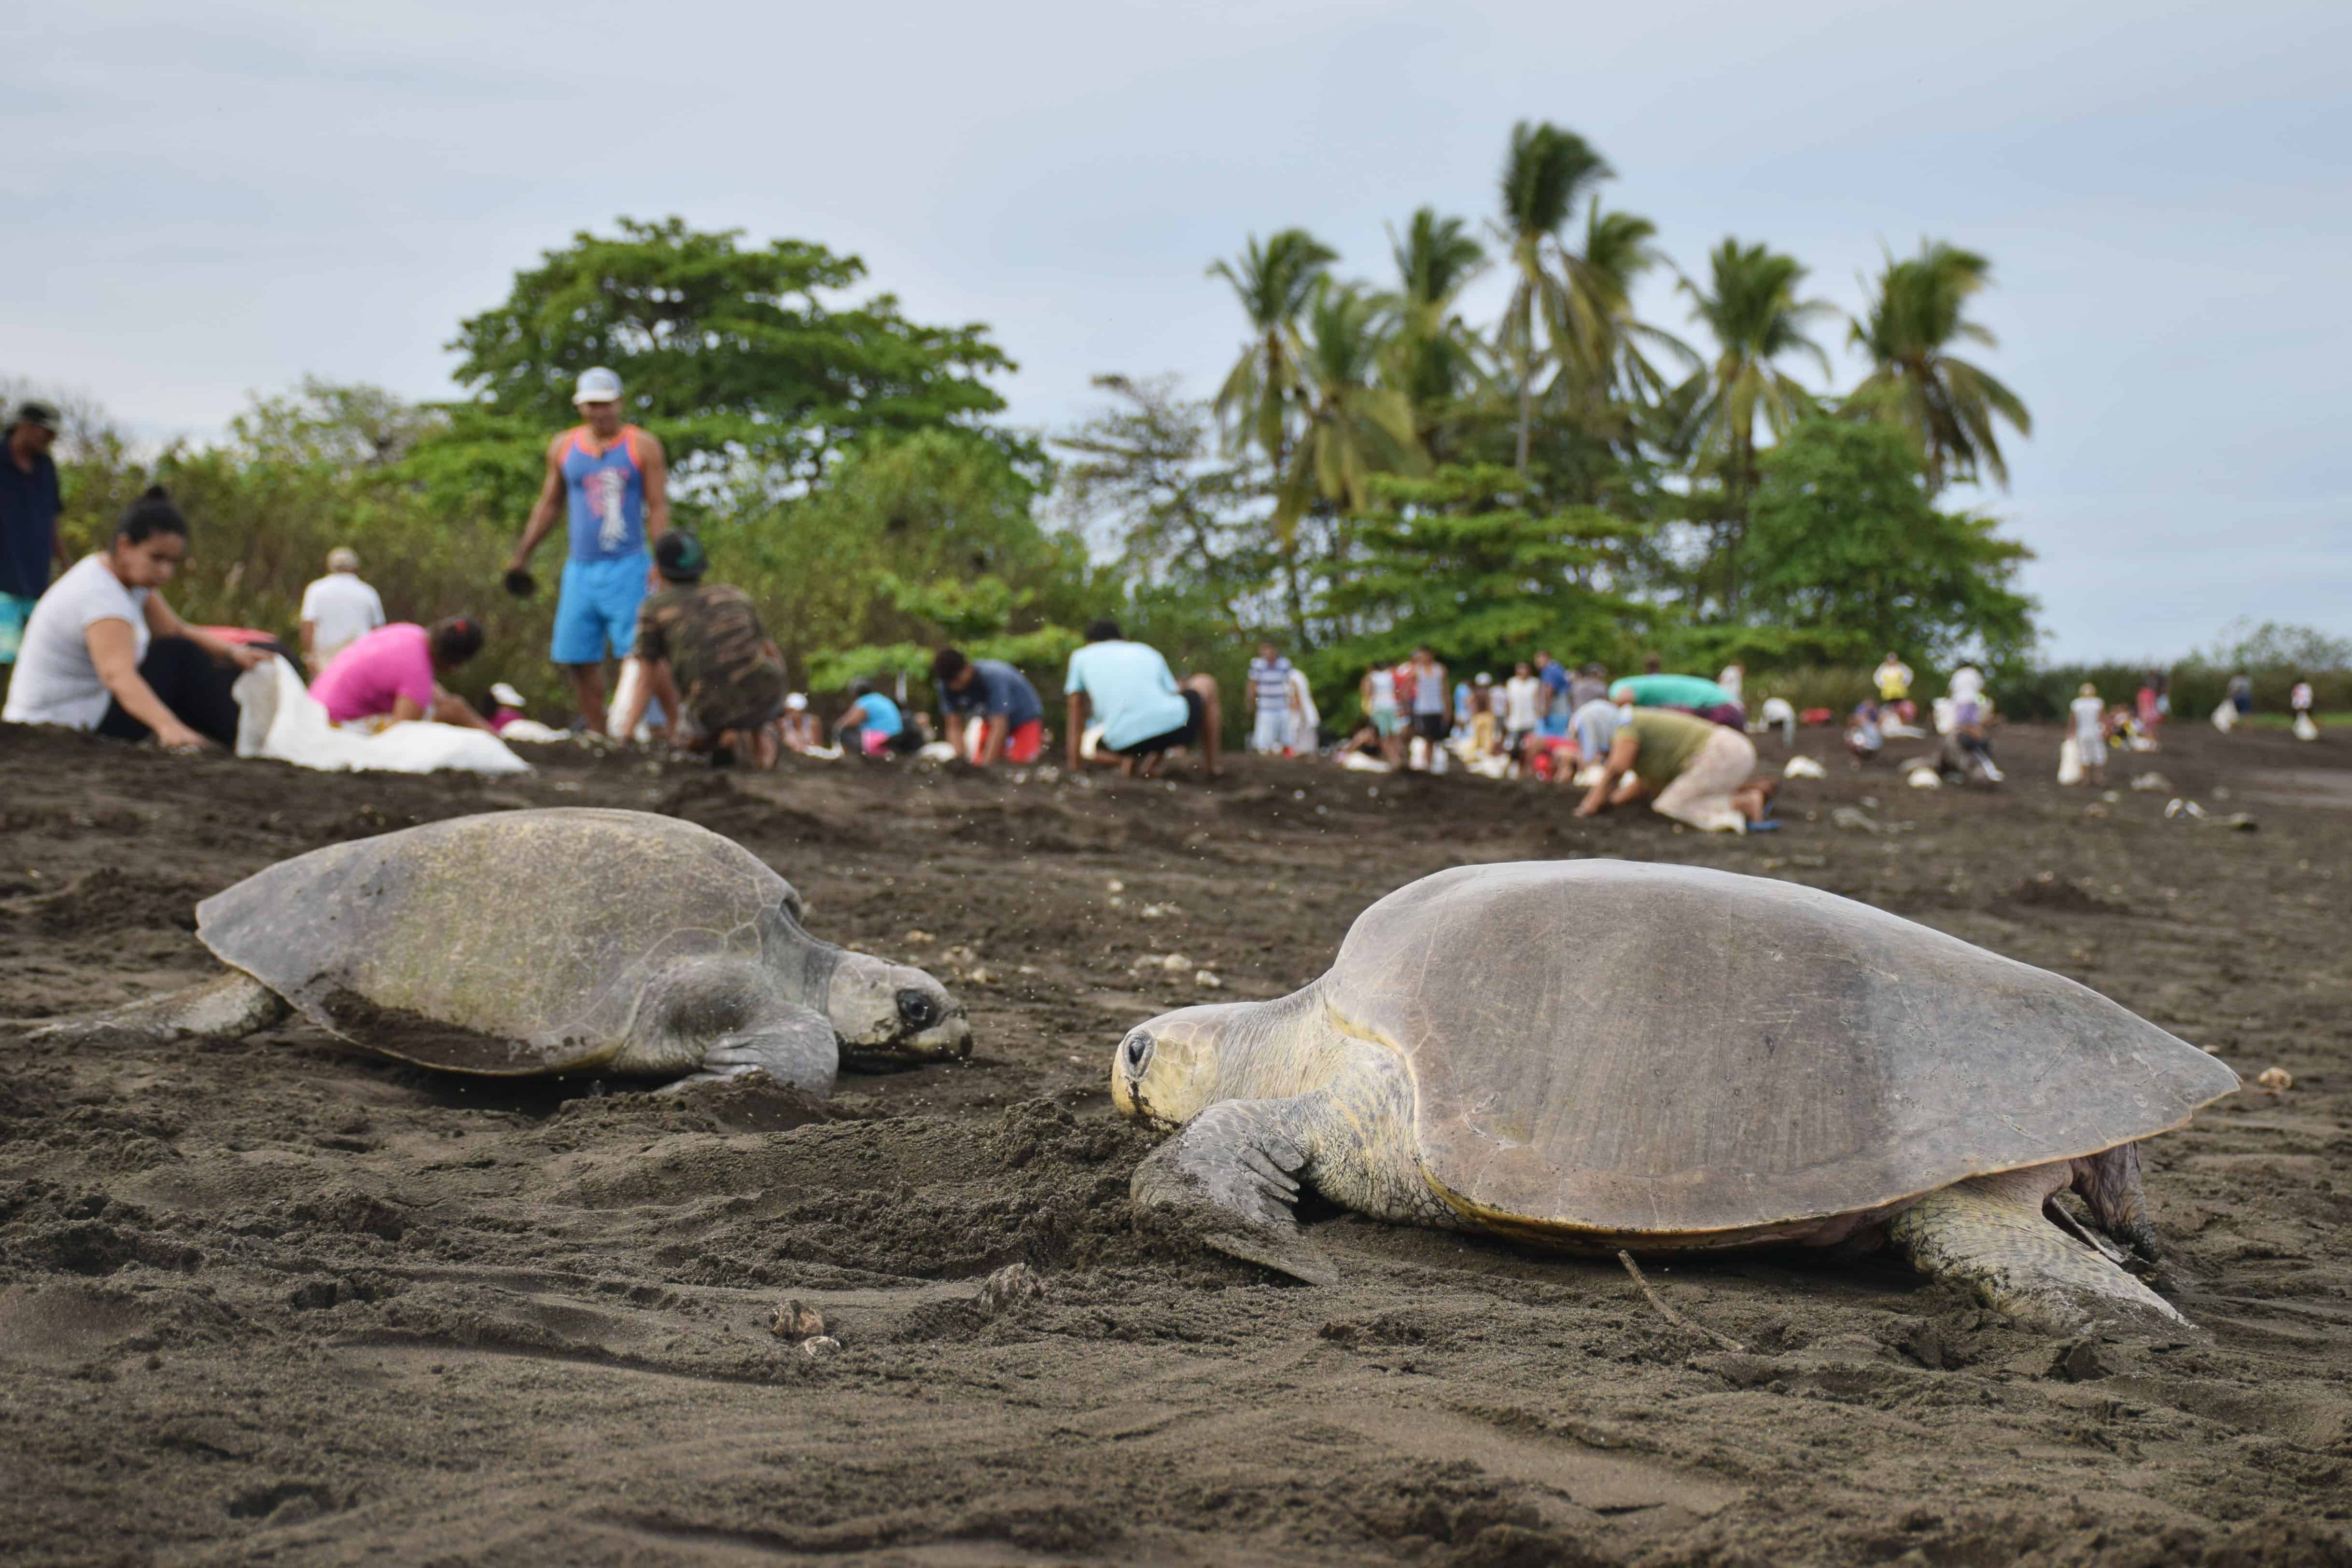 The last few turtles make their way on and off the beach at Ostional, Costa Rica.